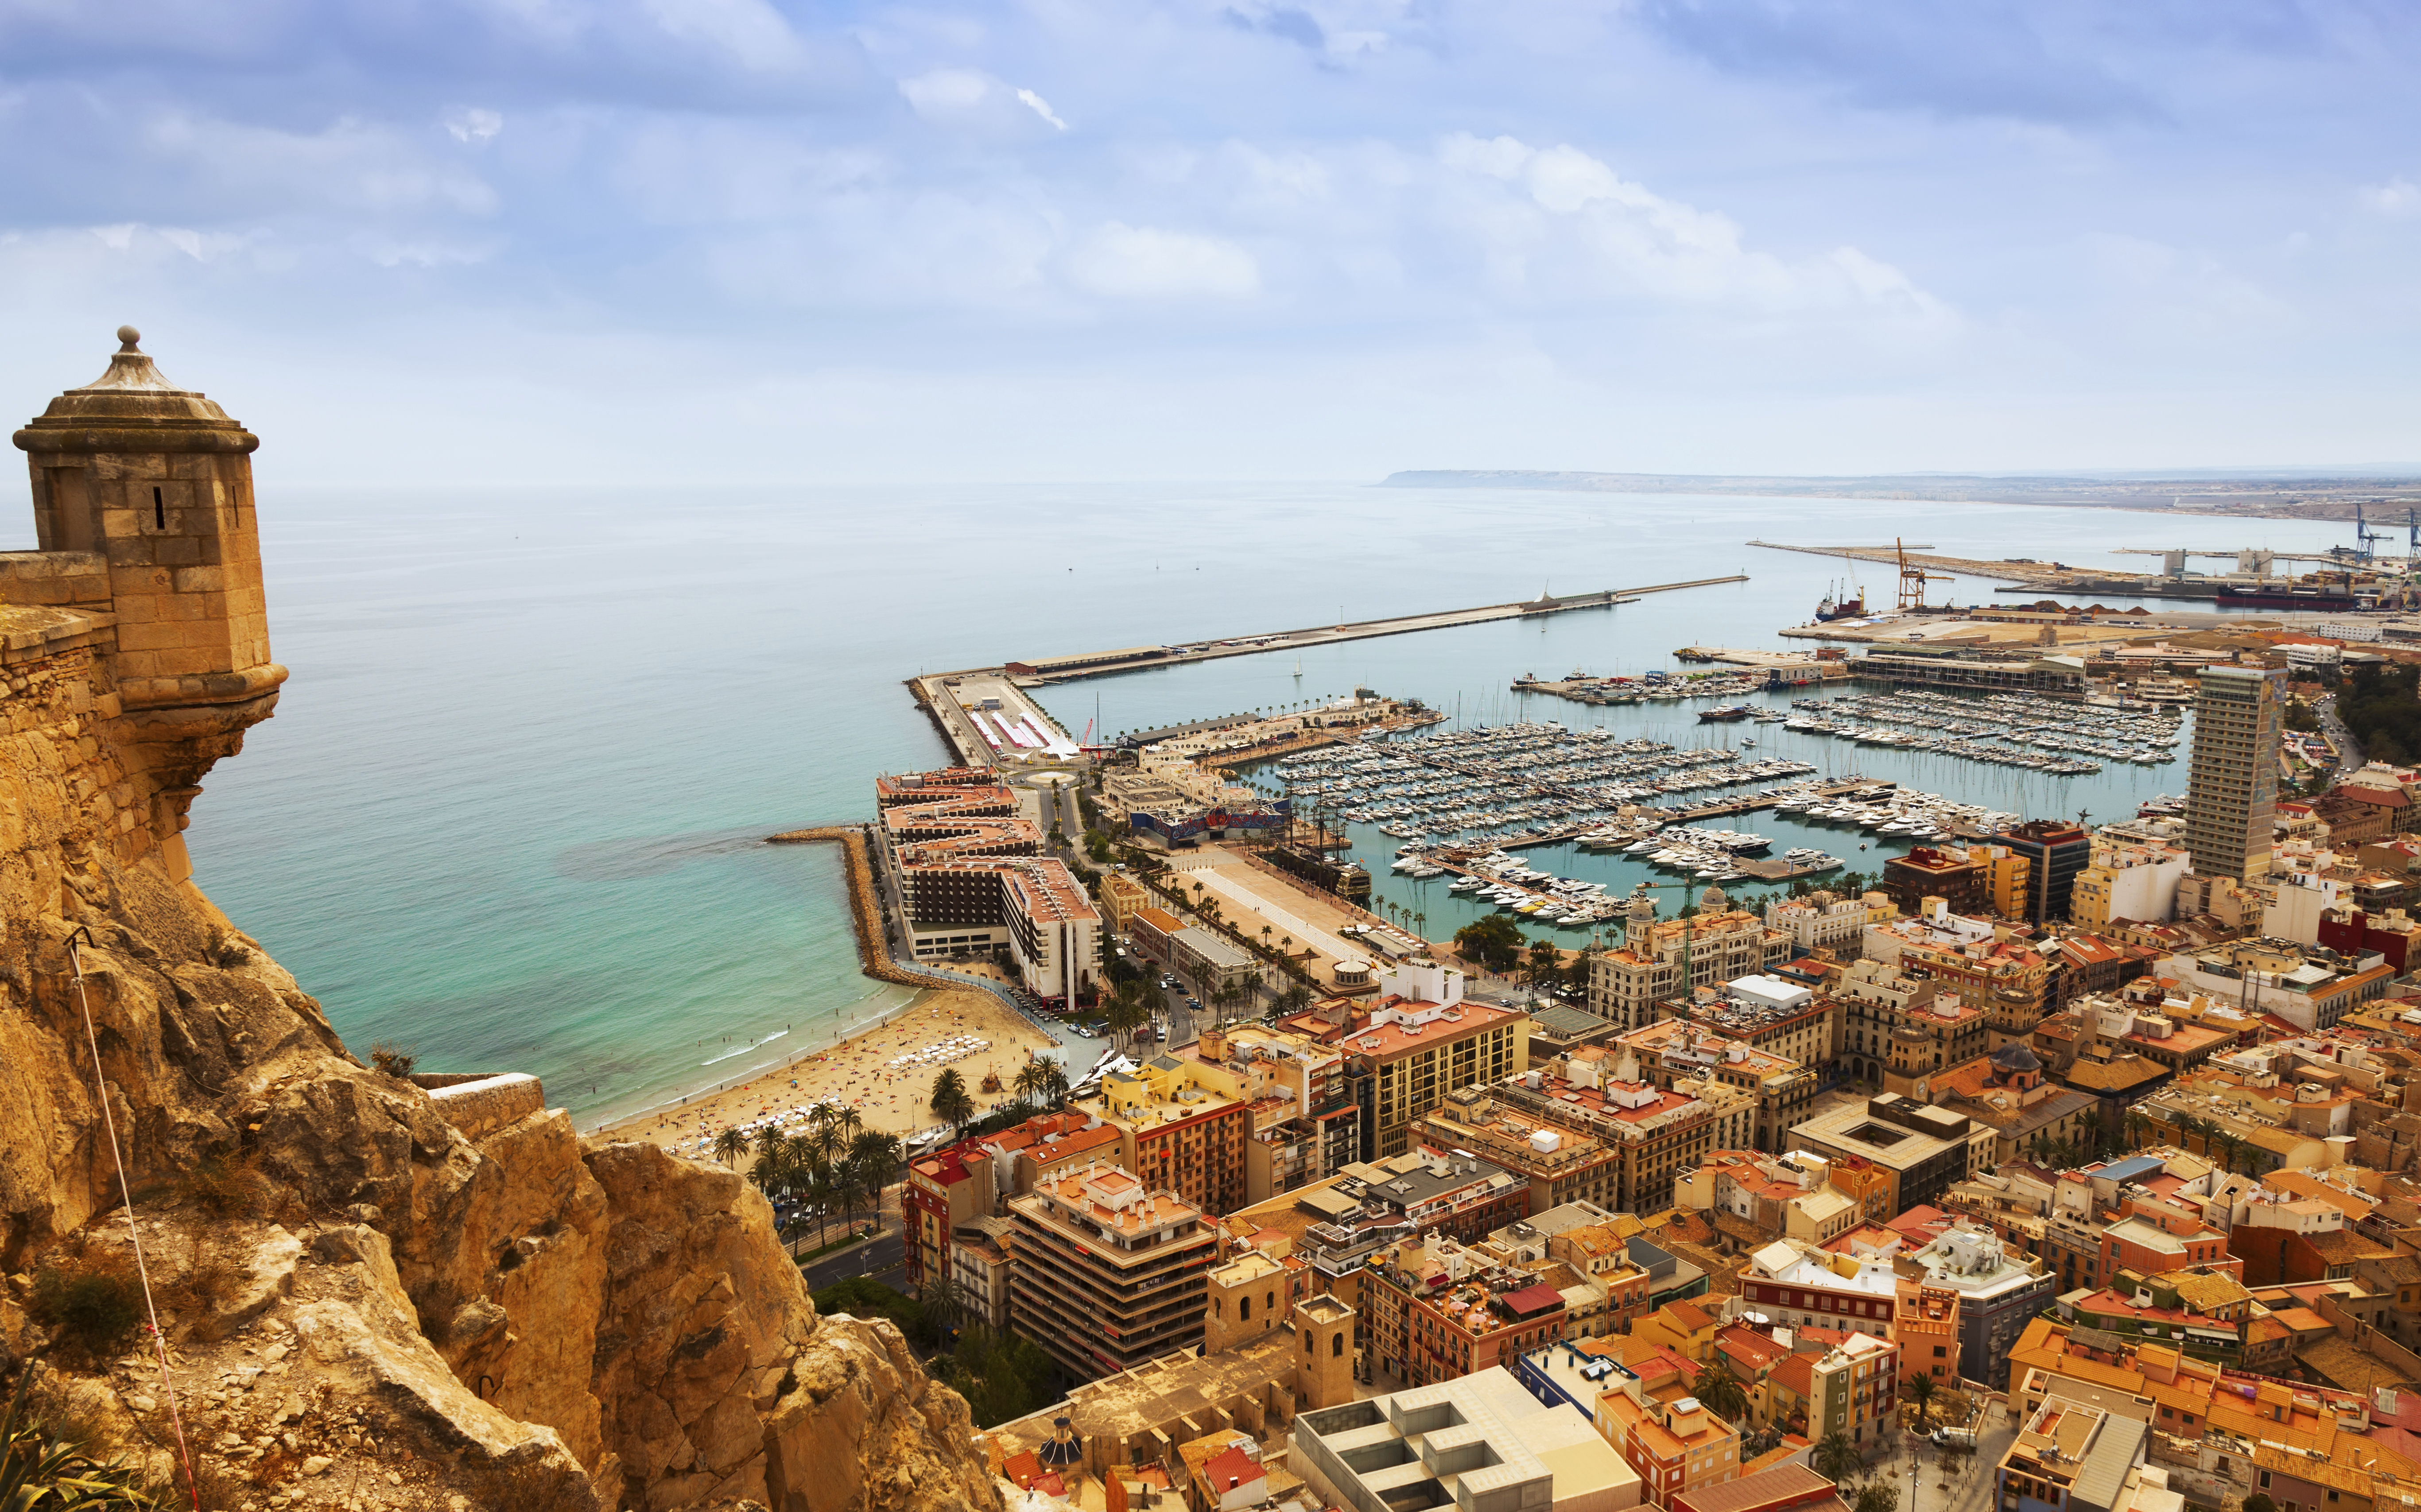 Top 15 Attractions And Things To Do In Alicante Skyscanners Travel Blog